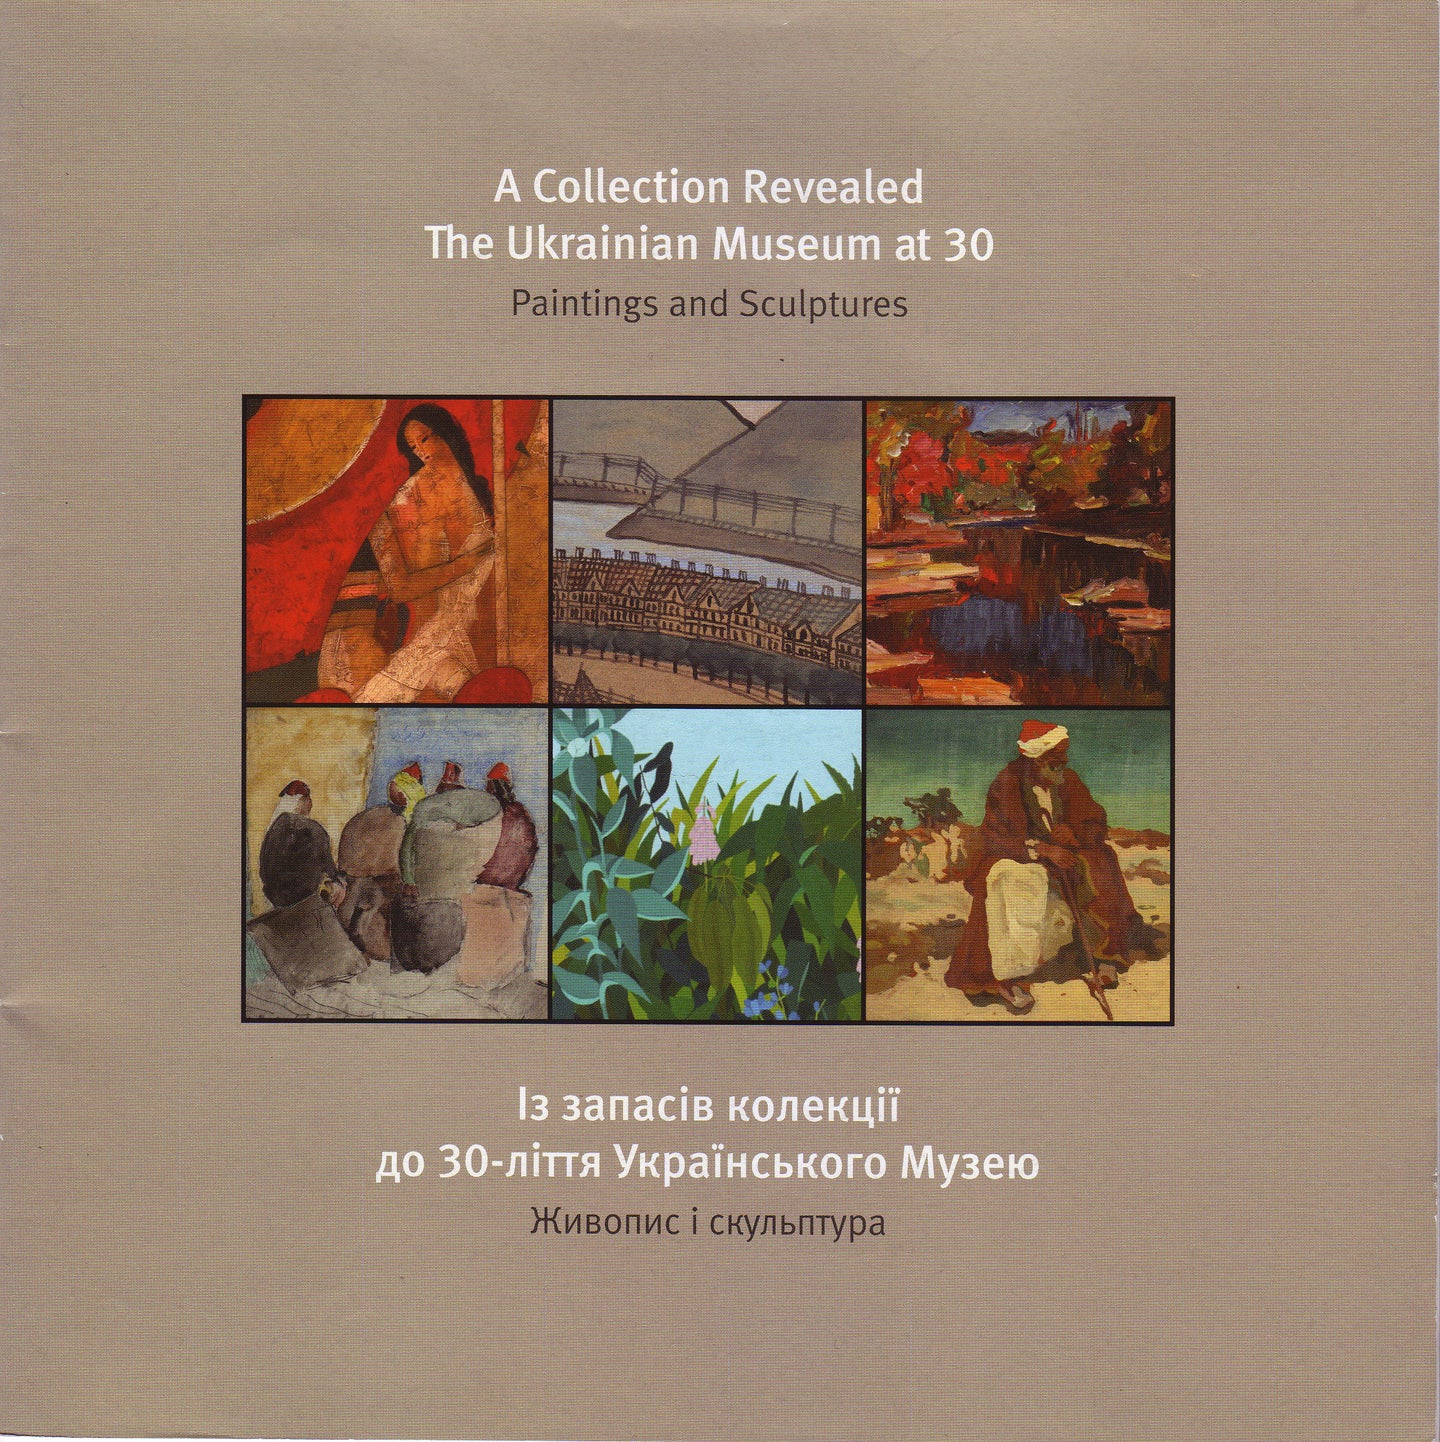 A Collection Revealed: The Ukrainian Museum at 30  Paintings and Sculptures